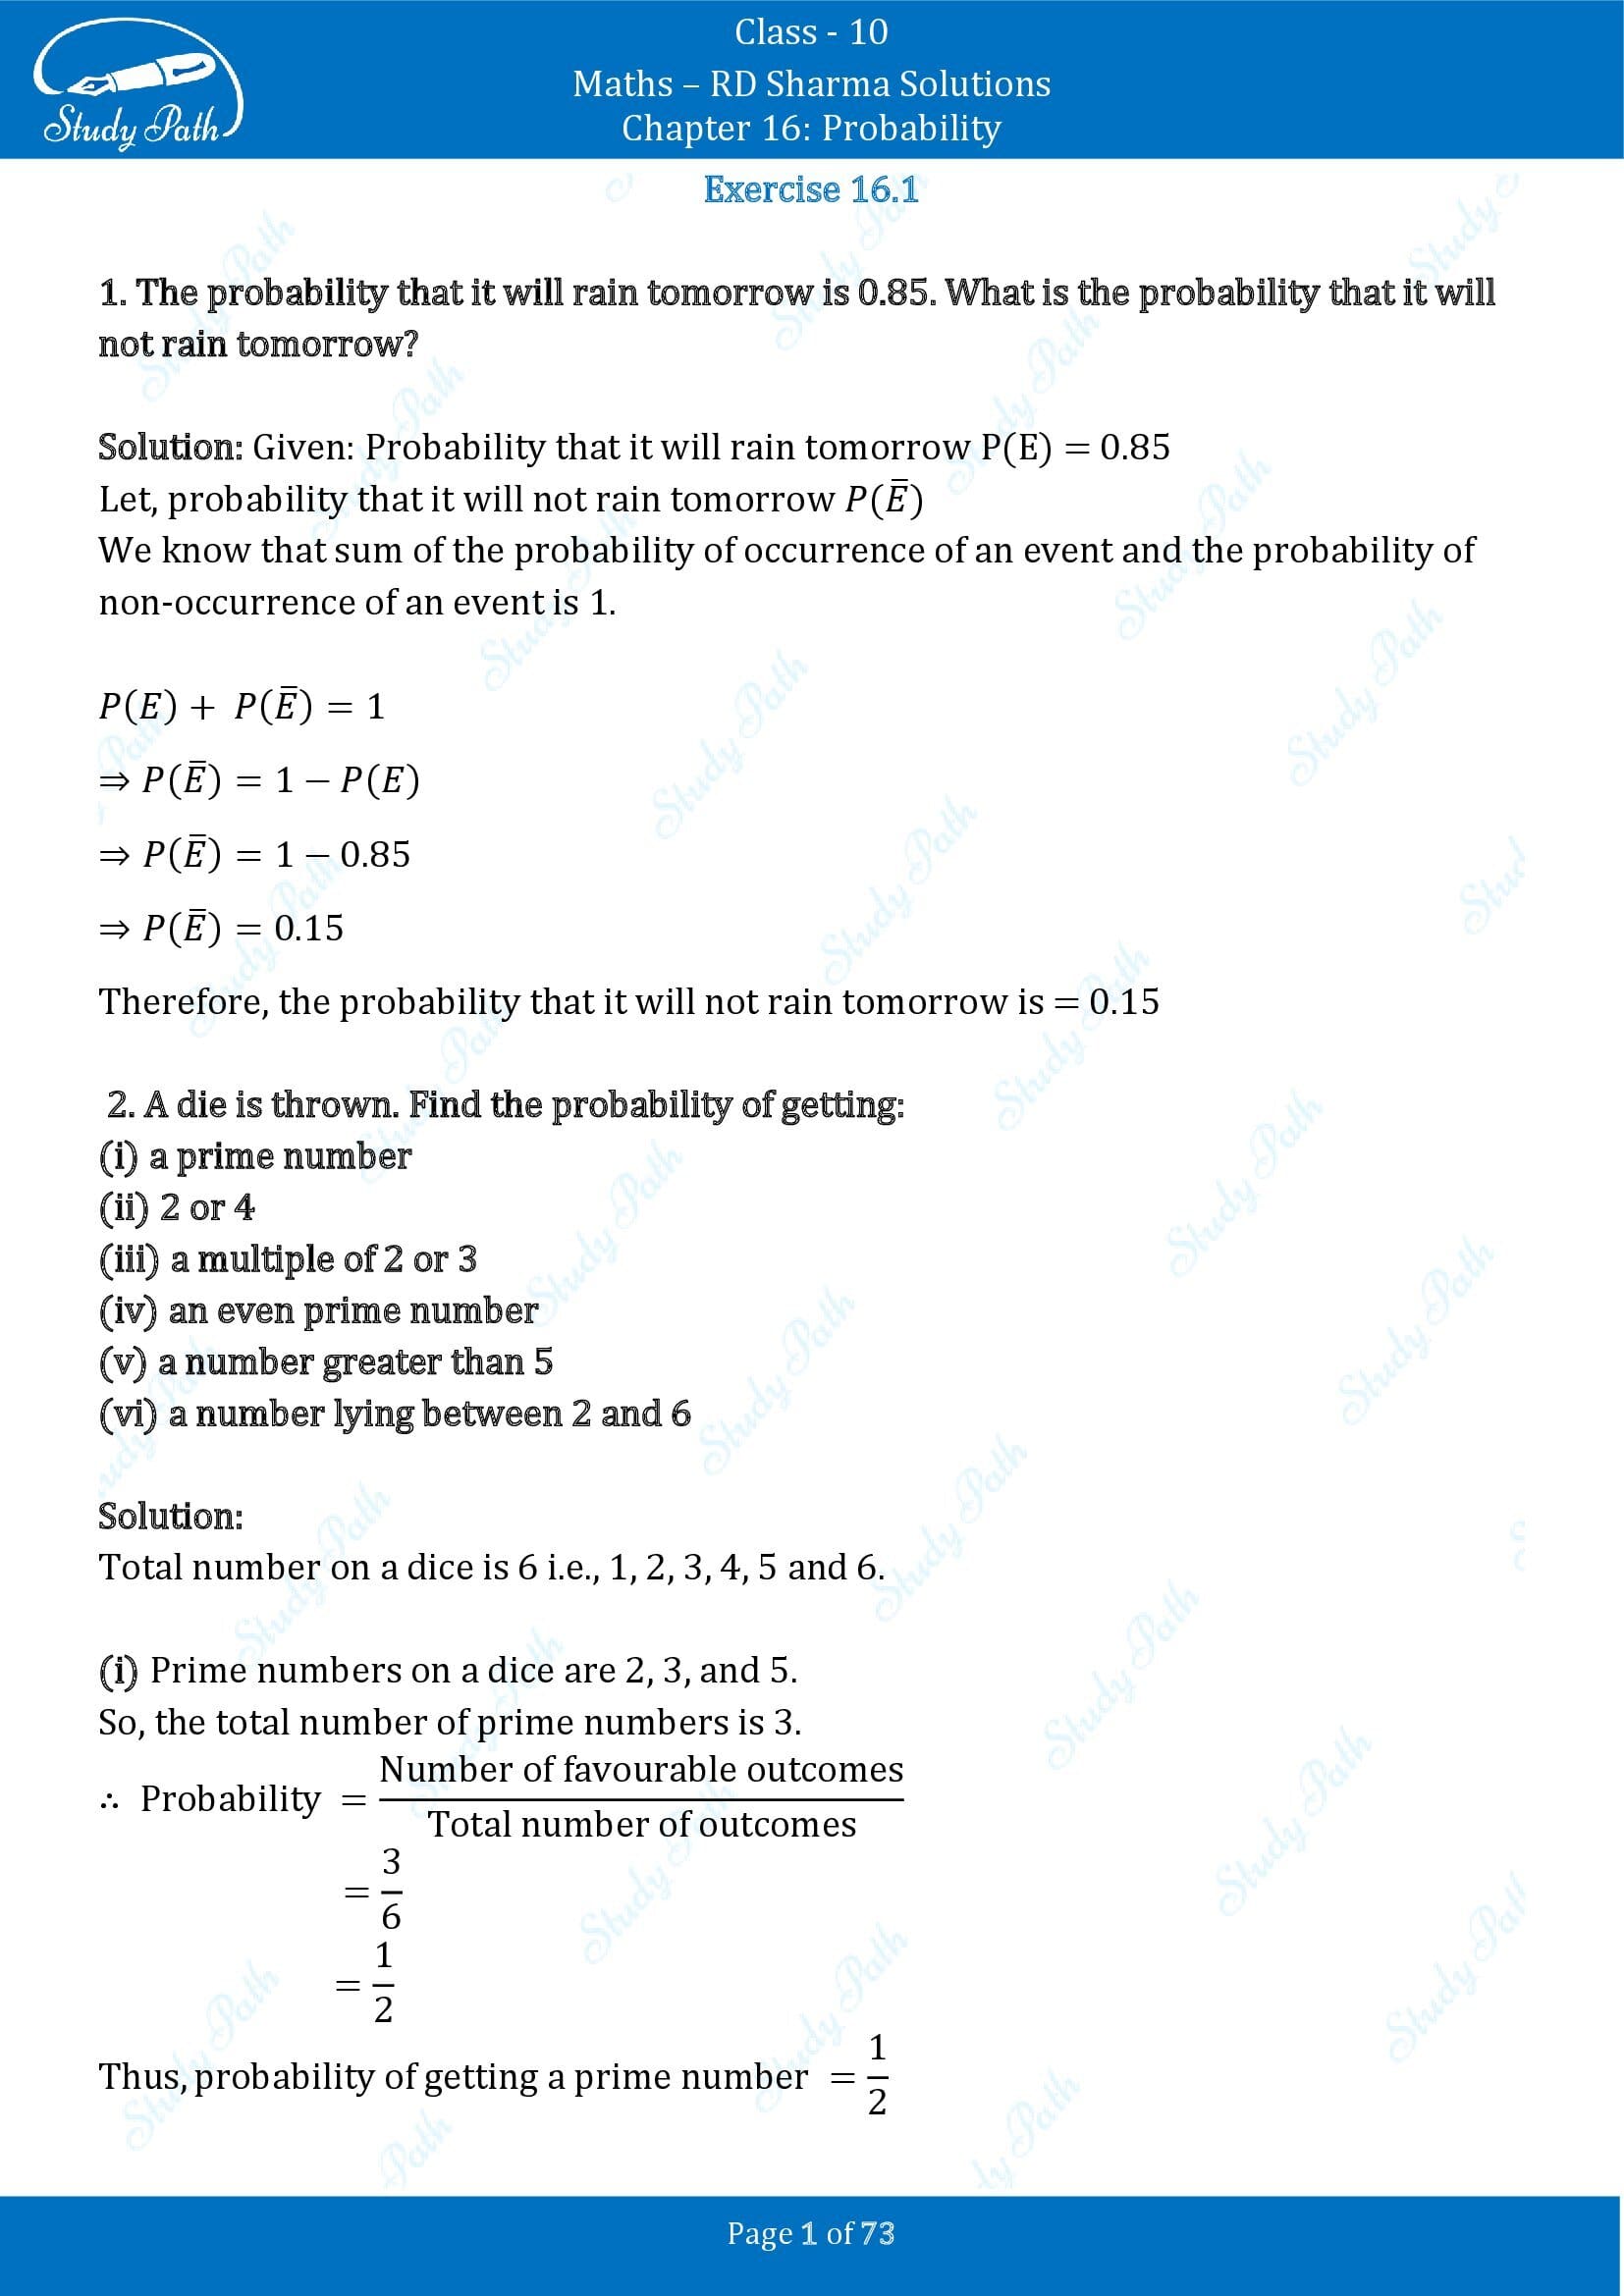 RD Sharma Solutions Class 10 Chapter 16 Probability Exercise 16.1 00001